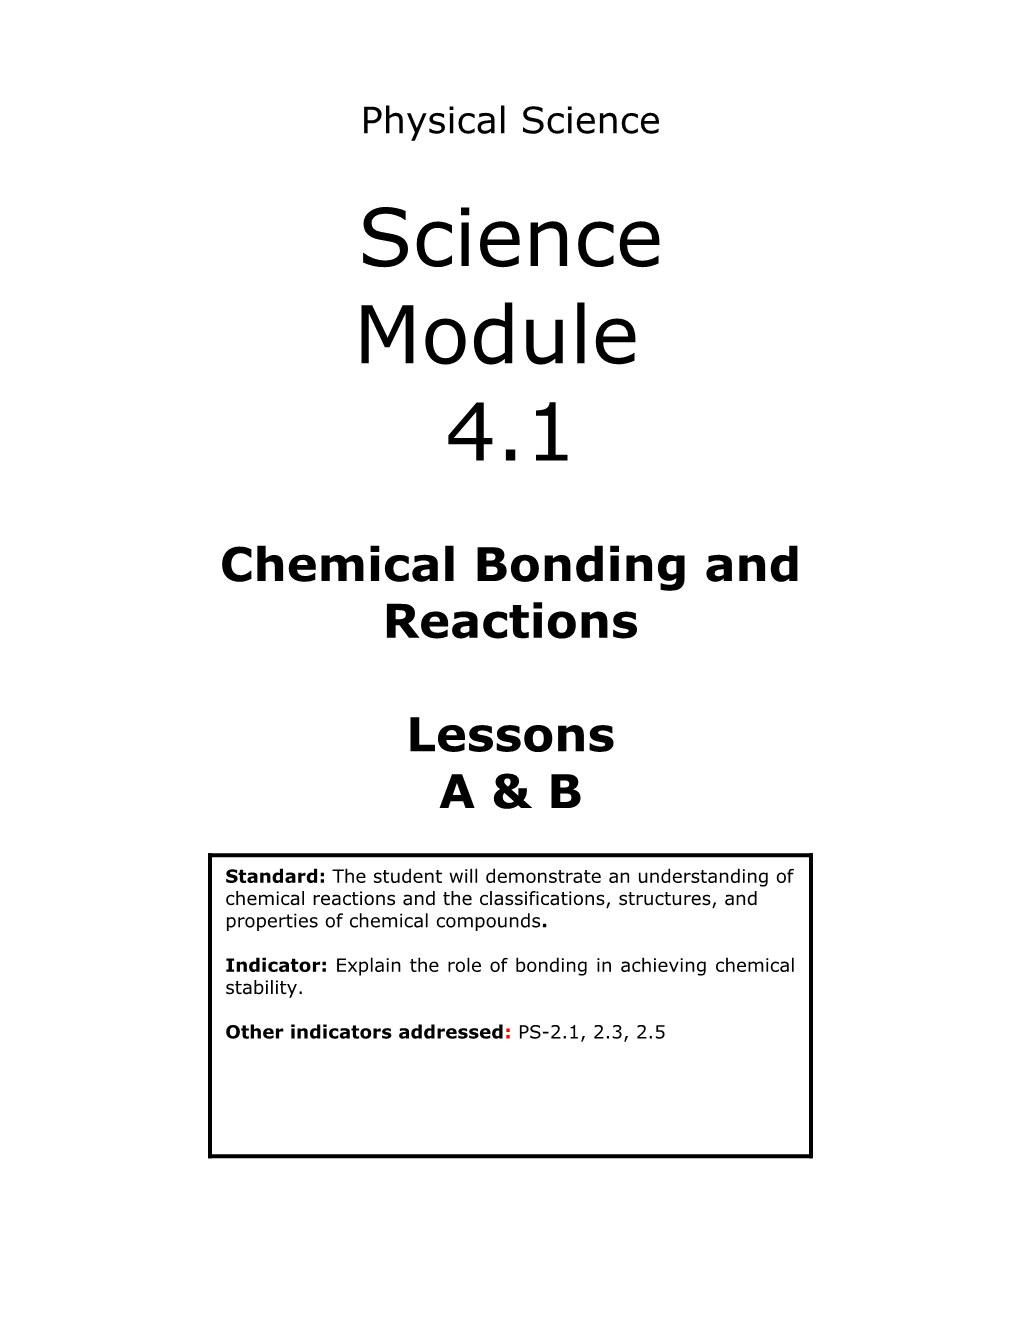 Chemical Bonding and Reactions